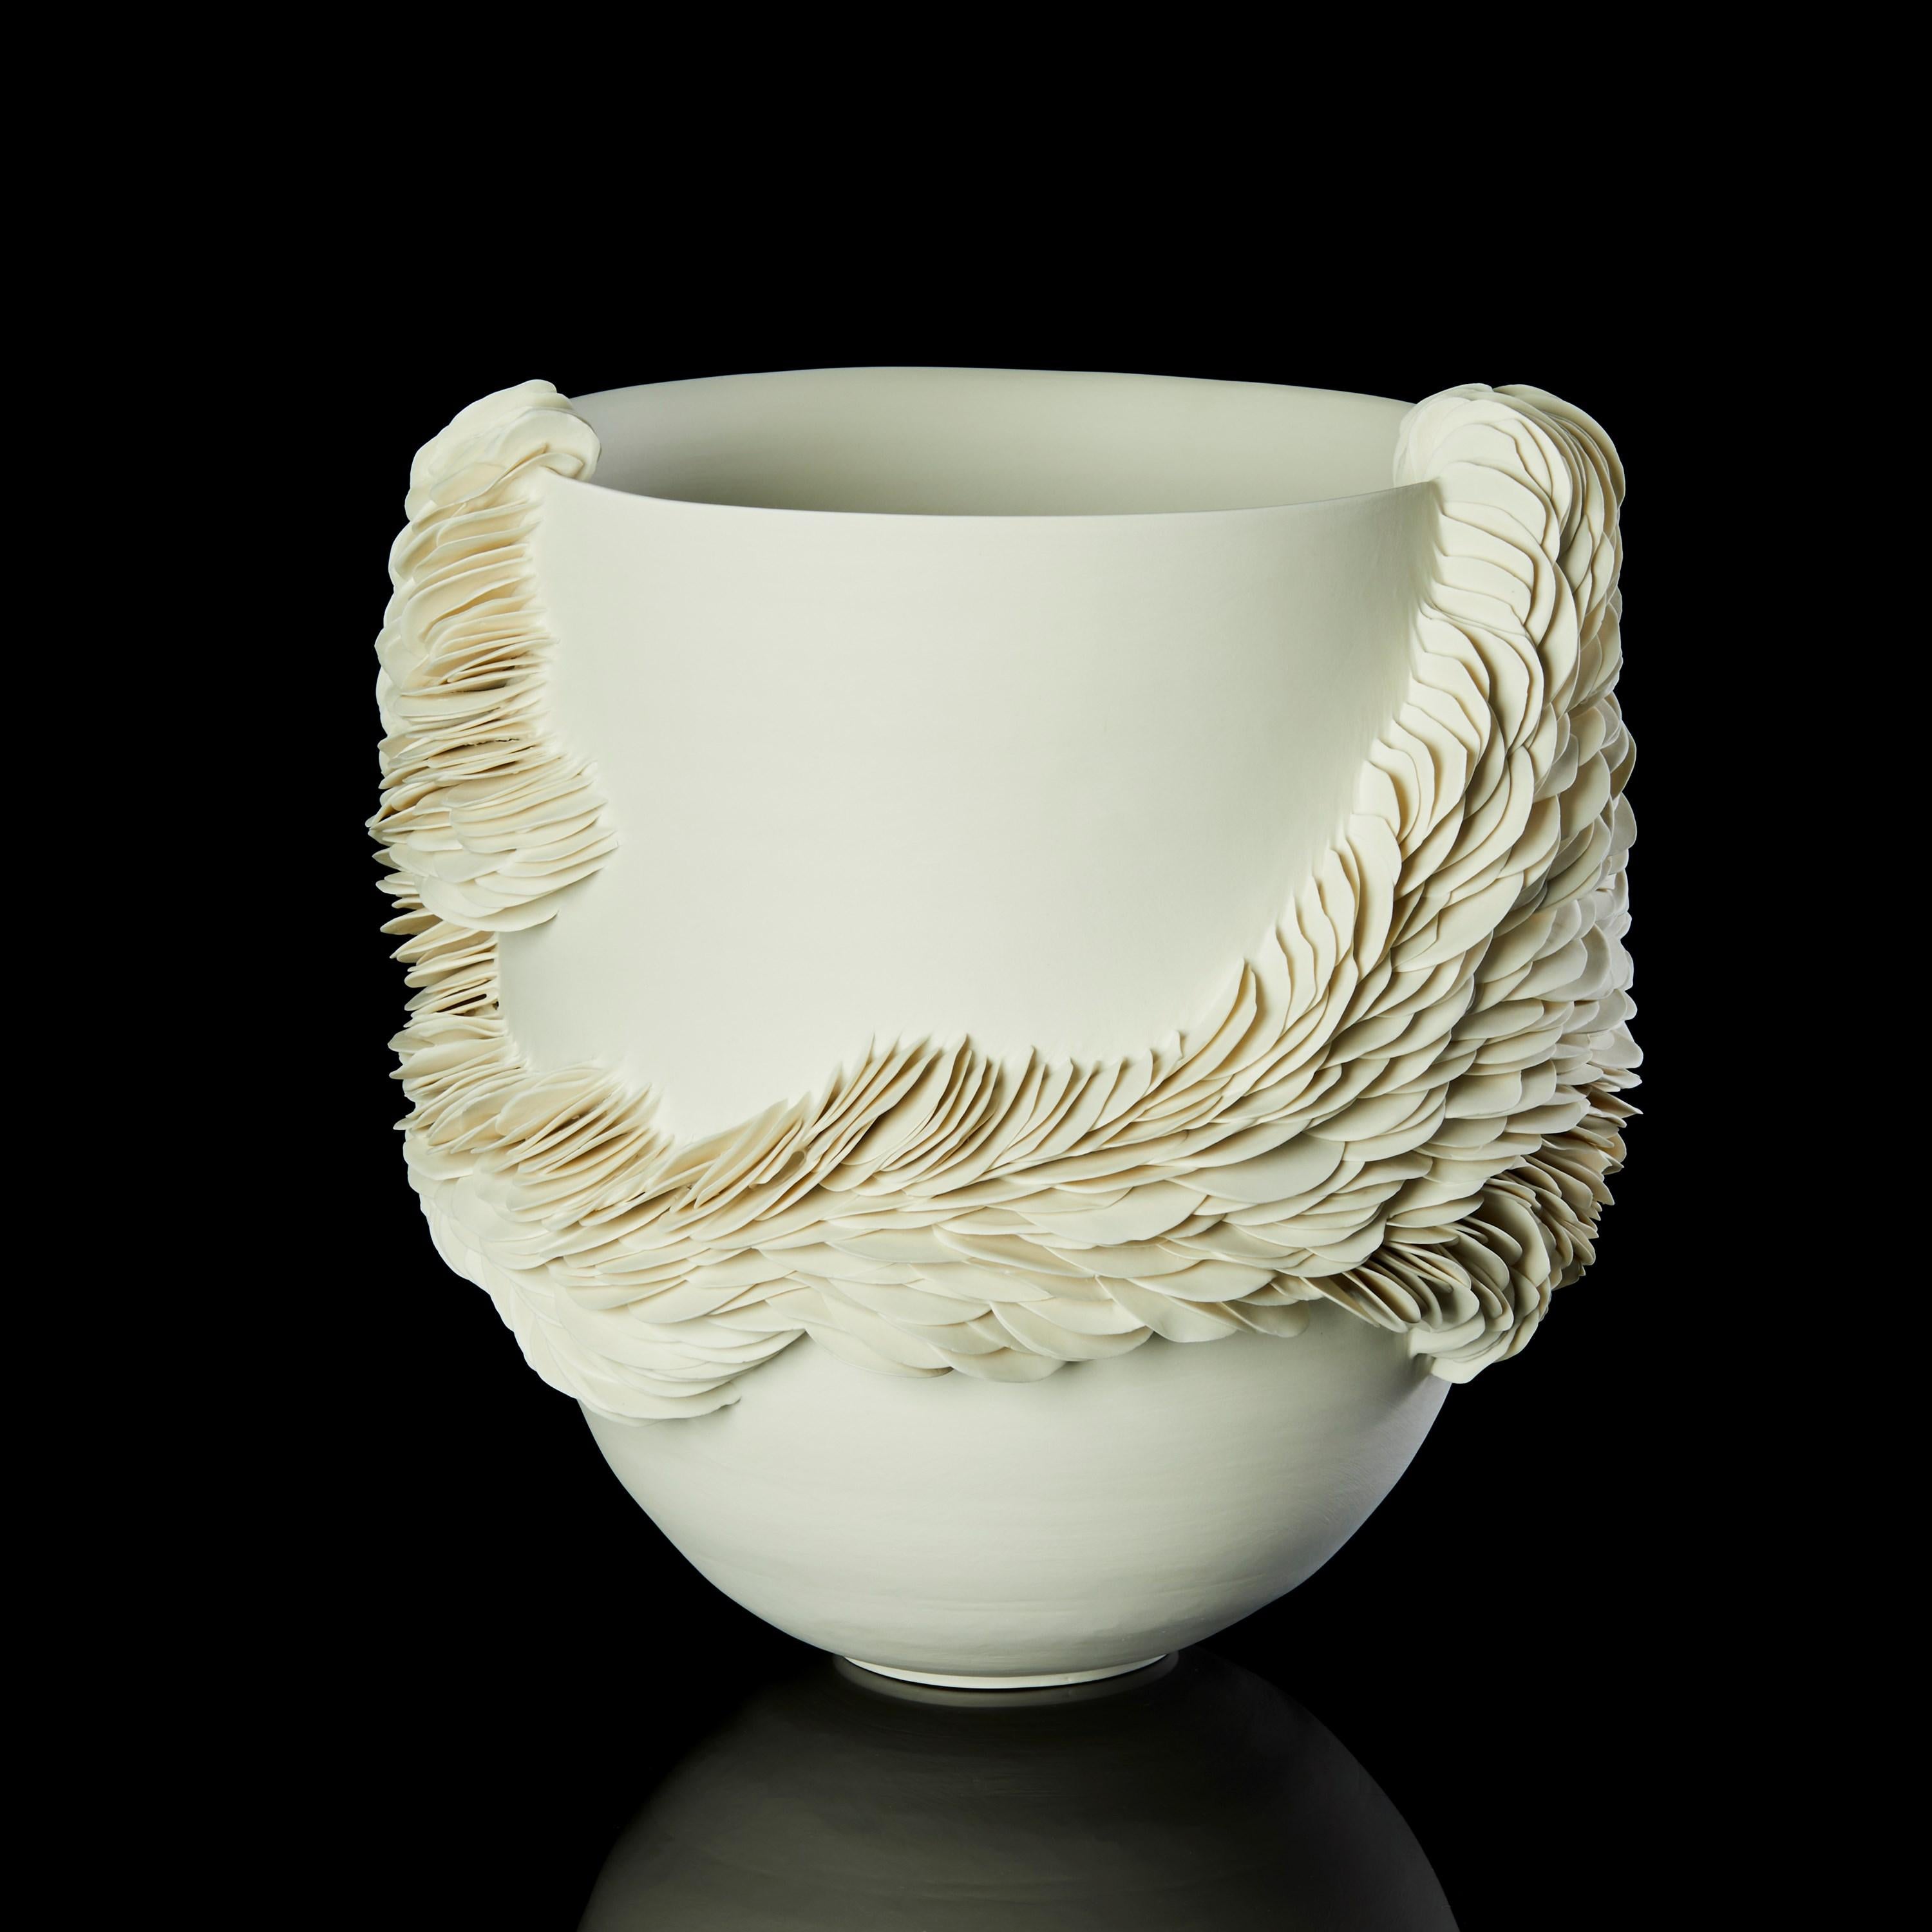 Porcelain White Tall Wrapping Bowl I, a porcelain shard textured bowl by Olivia Walker